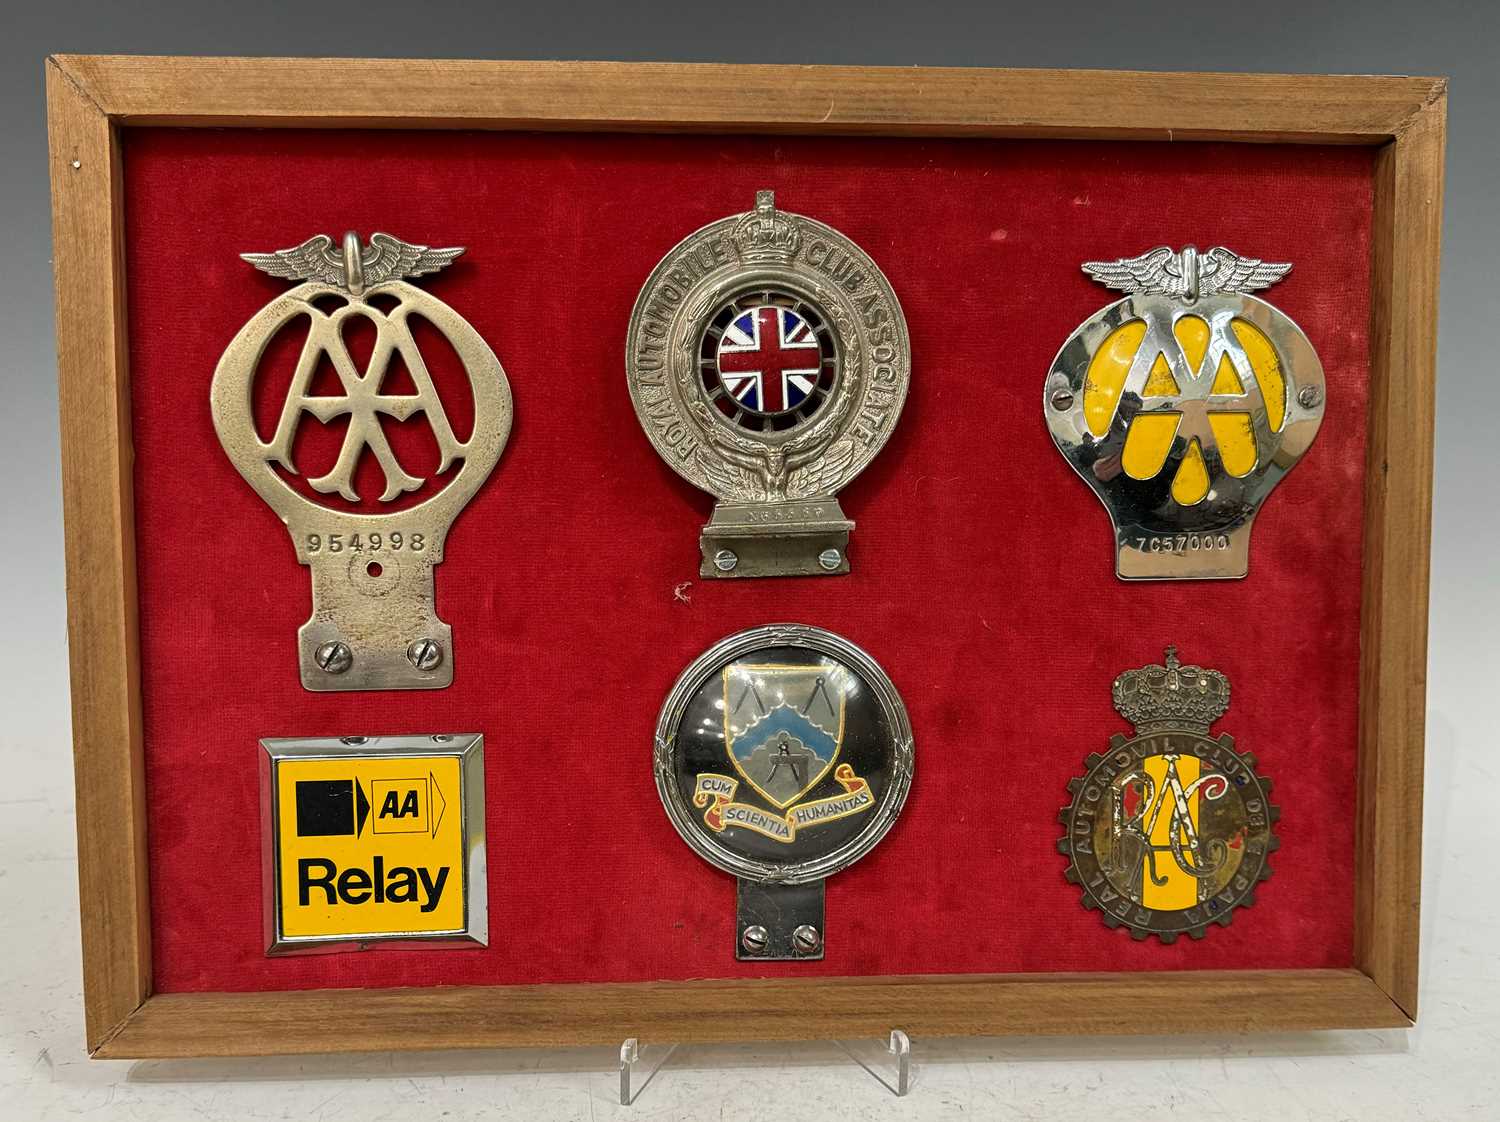 Automotive interest - A montage of six assorted car badges, mounted in a wooden frame with red baize